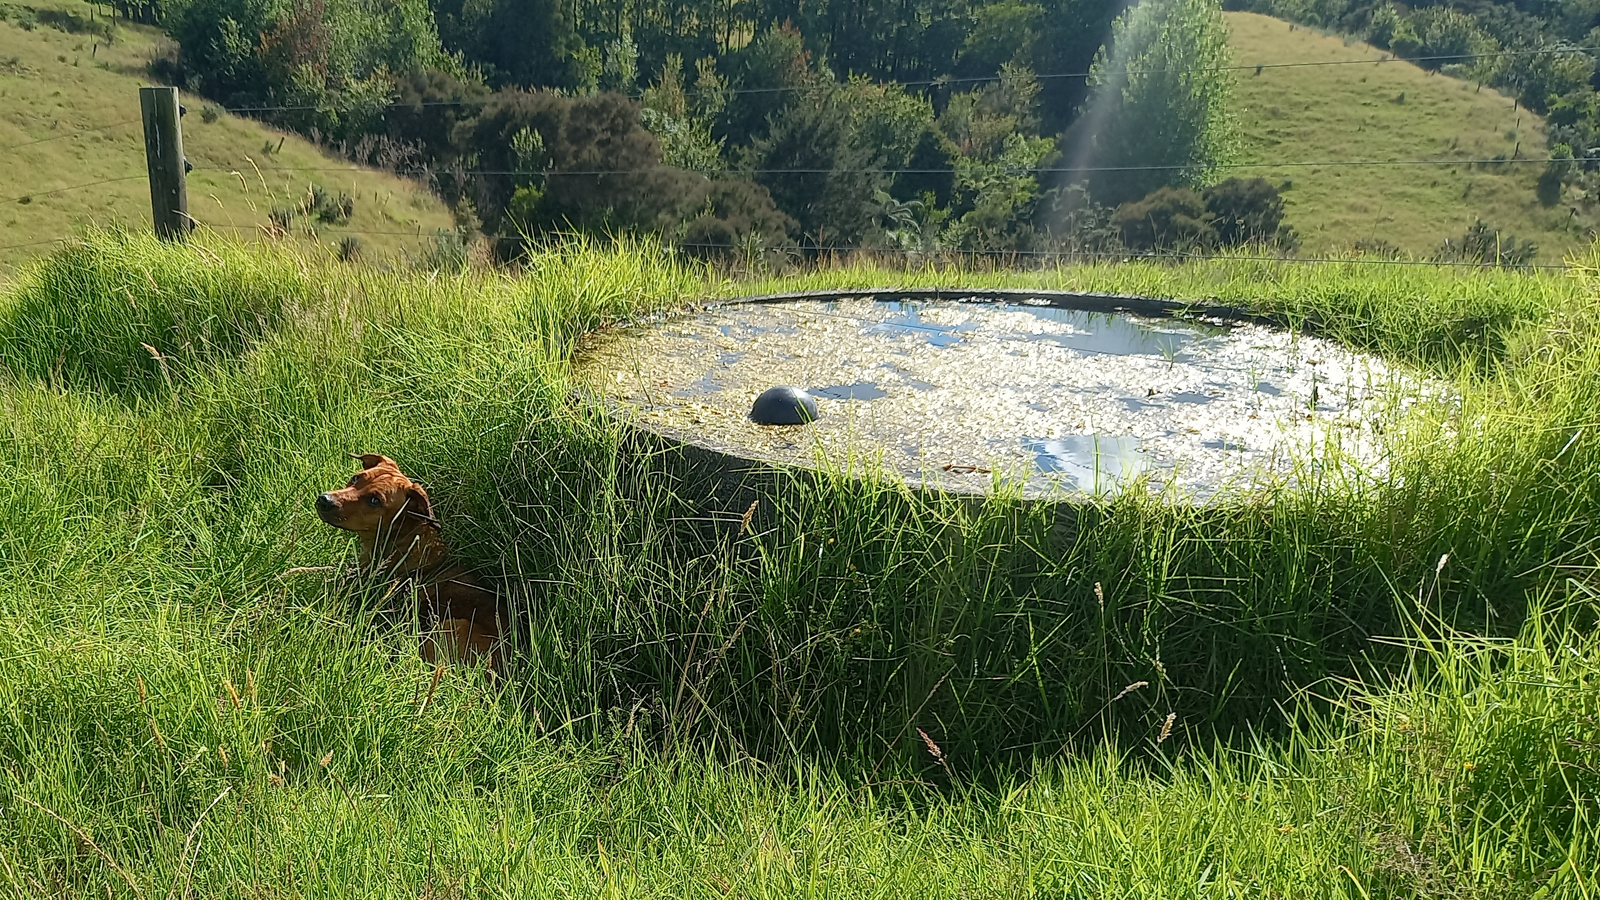 A round concrete cattle trough with grass growing up the sides and algae growing inside. Also our dog Roxy in the shade of the trough.